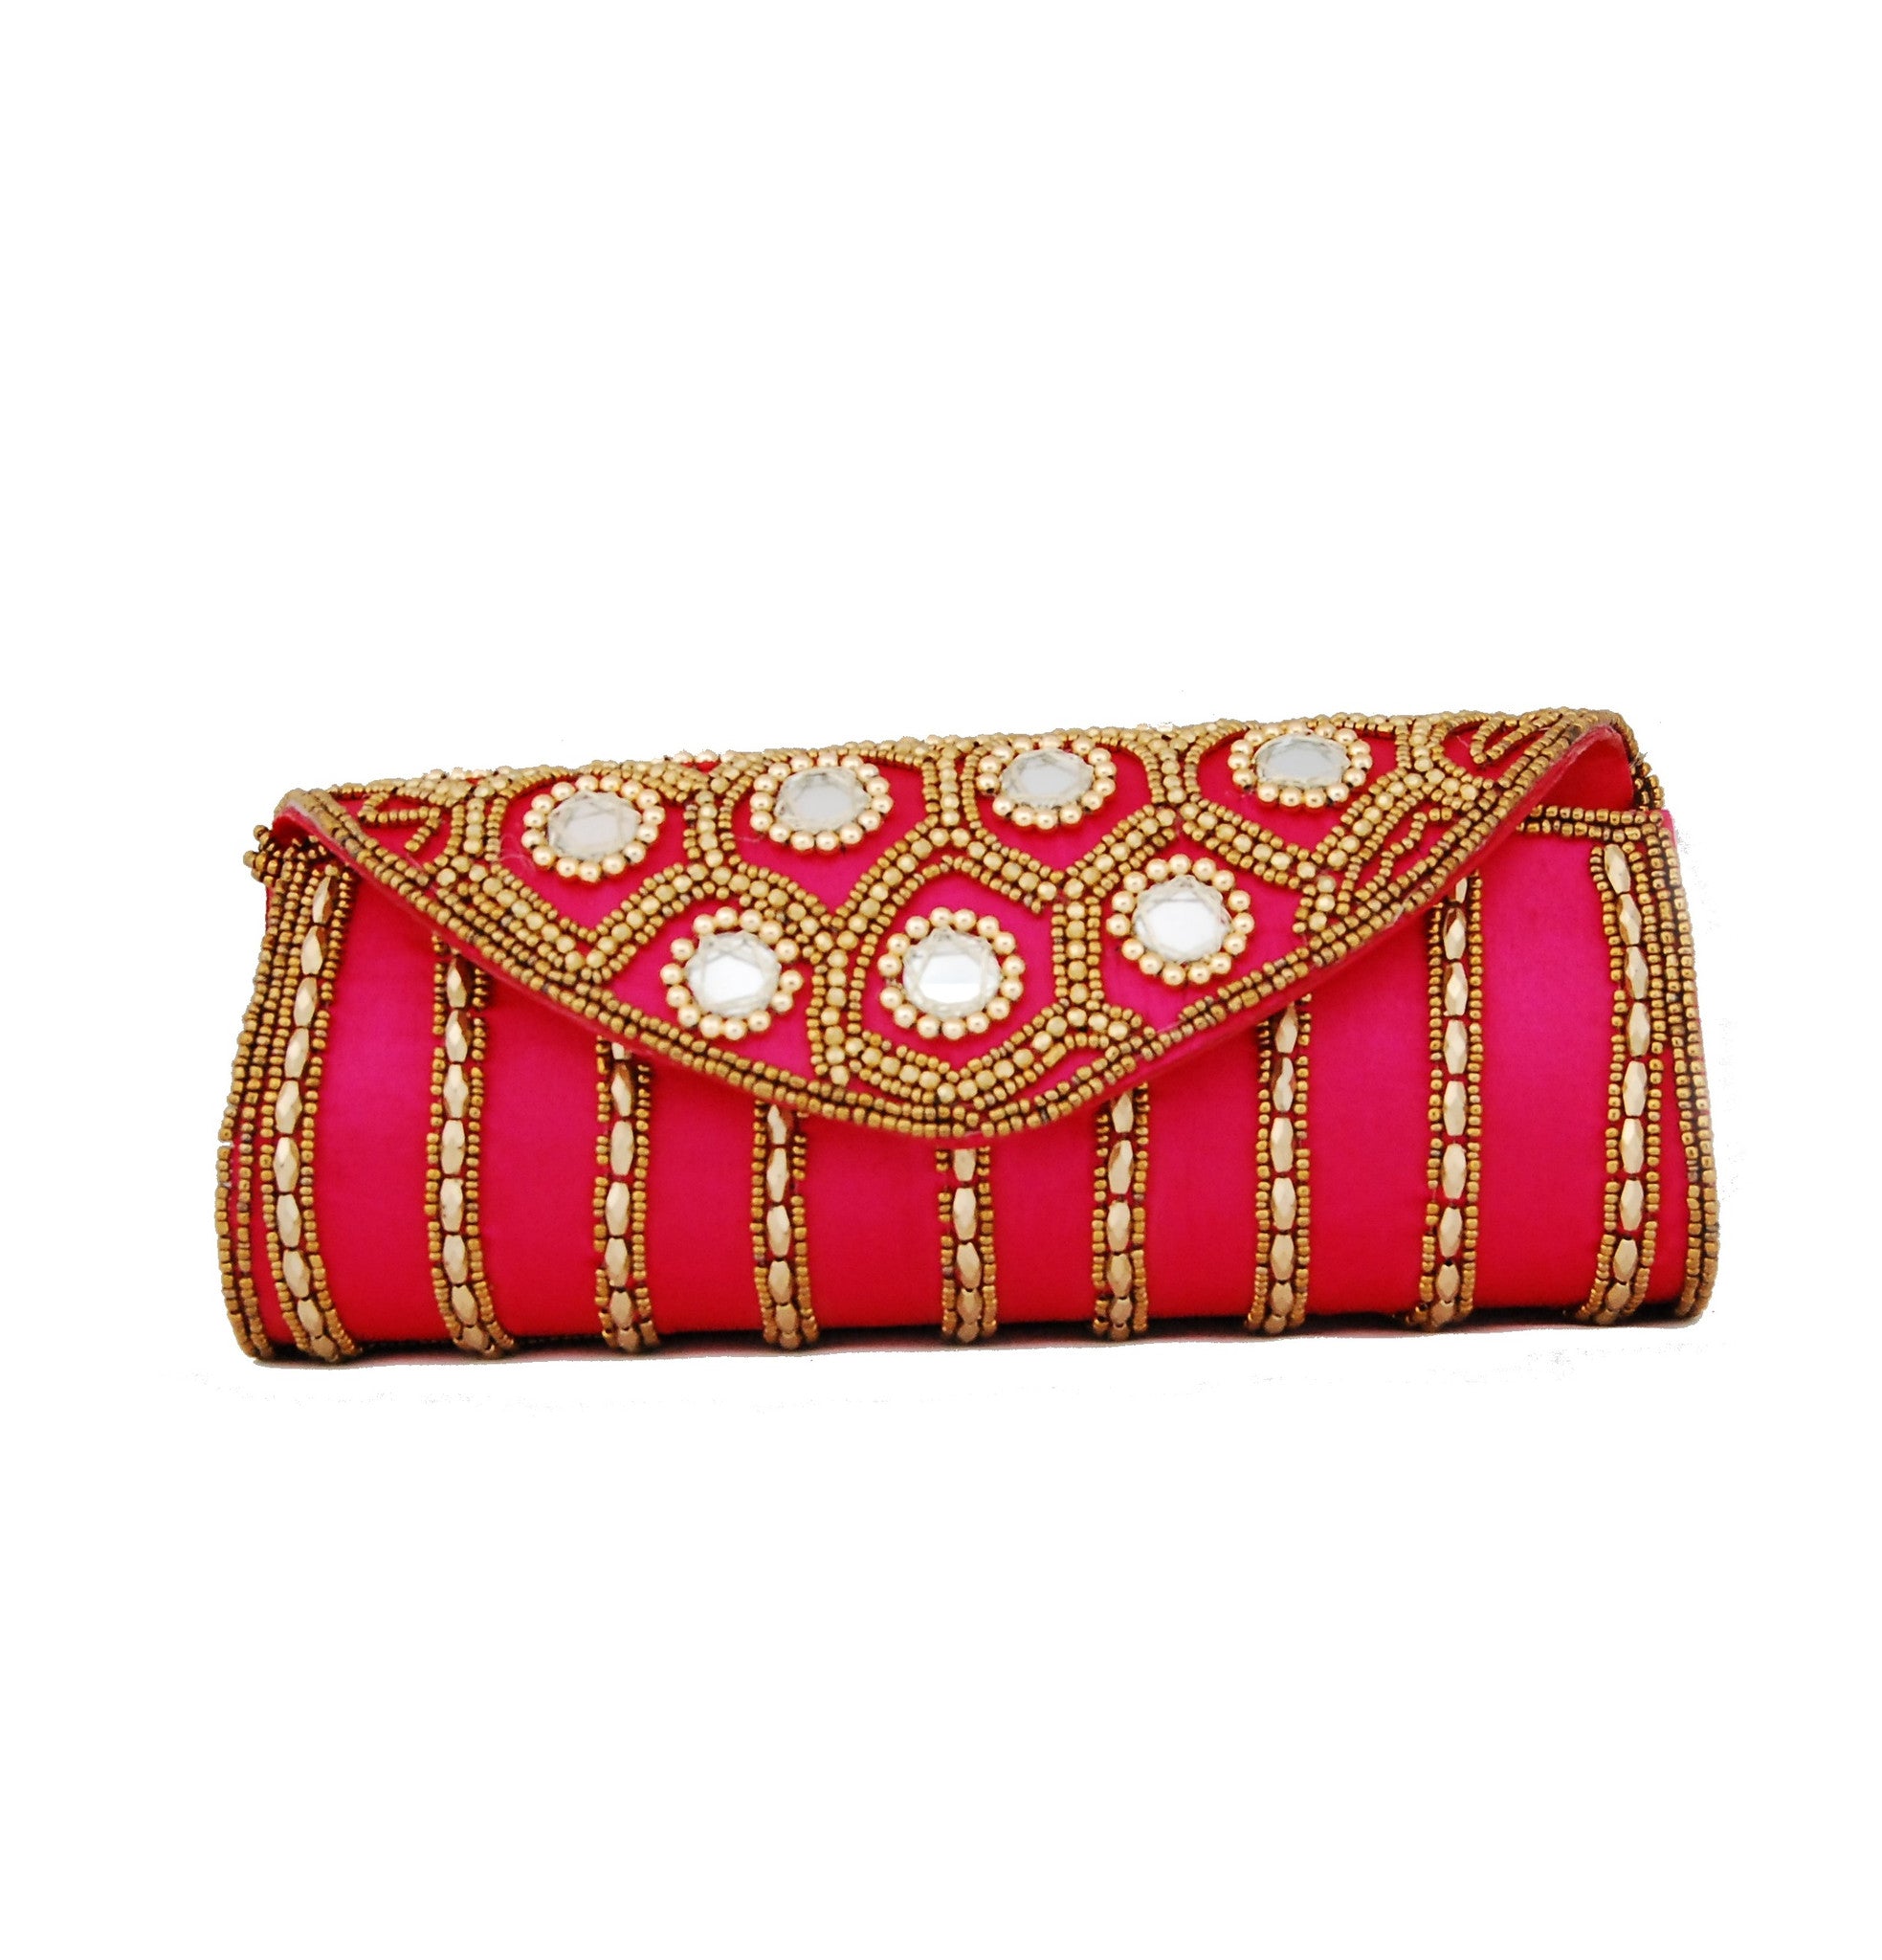 Pink color Dupion Silk Clutch Bag with beads and Stone work